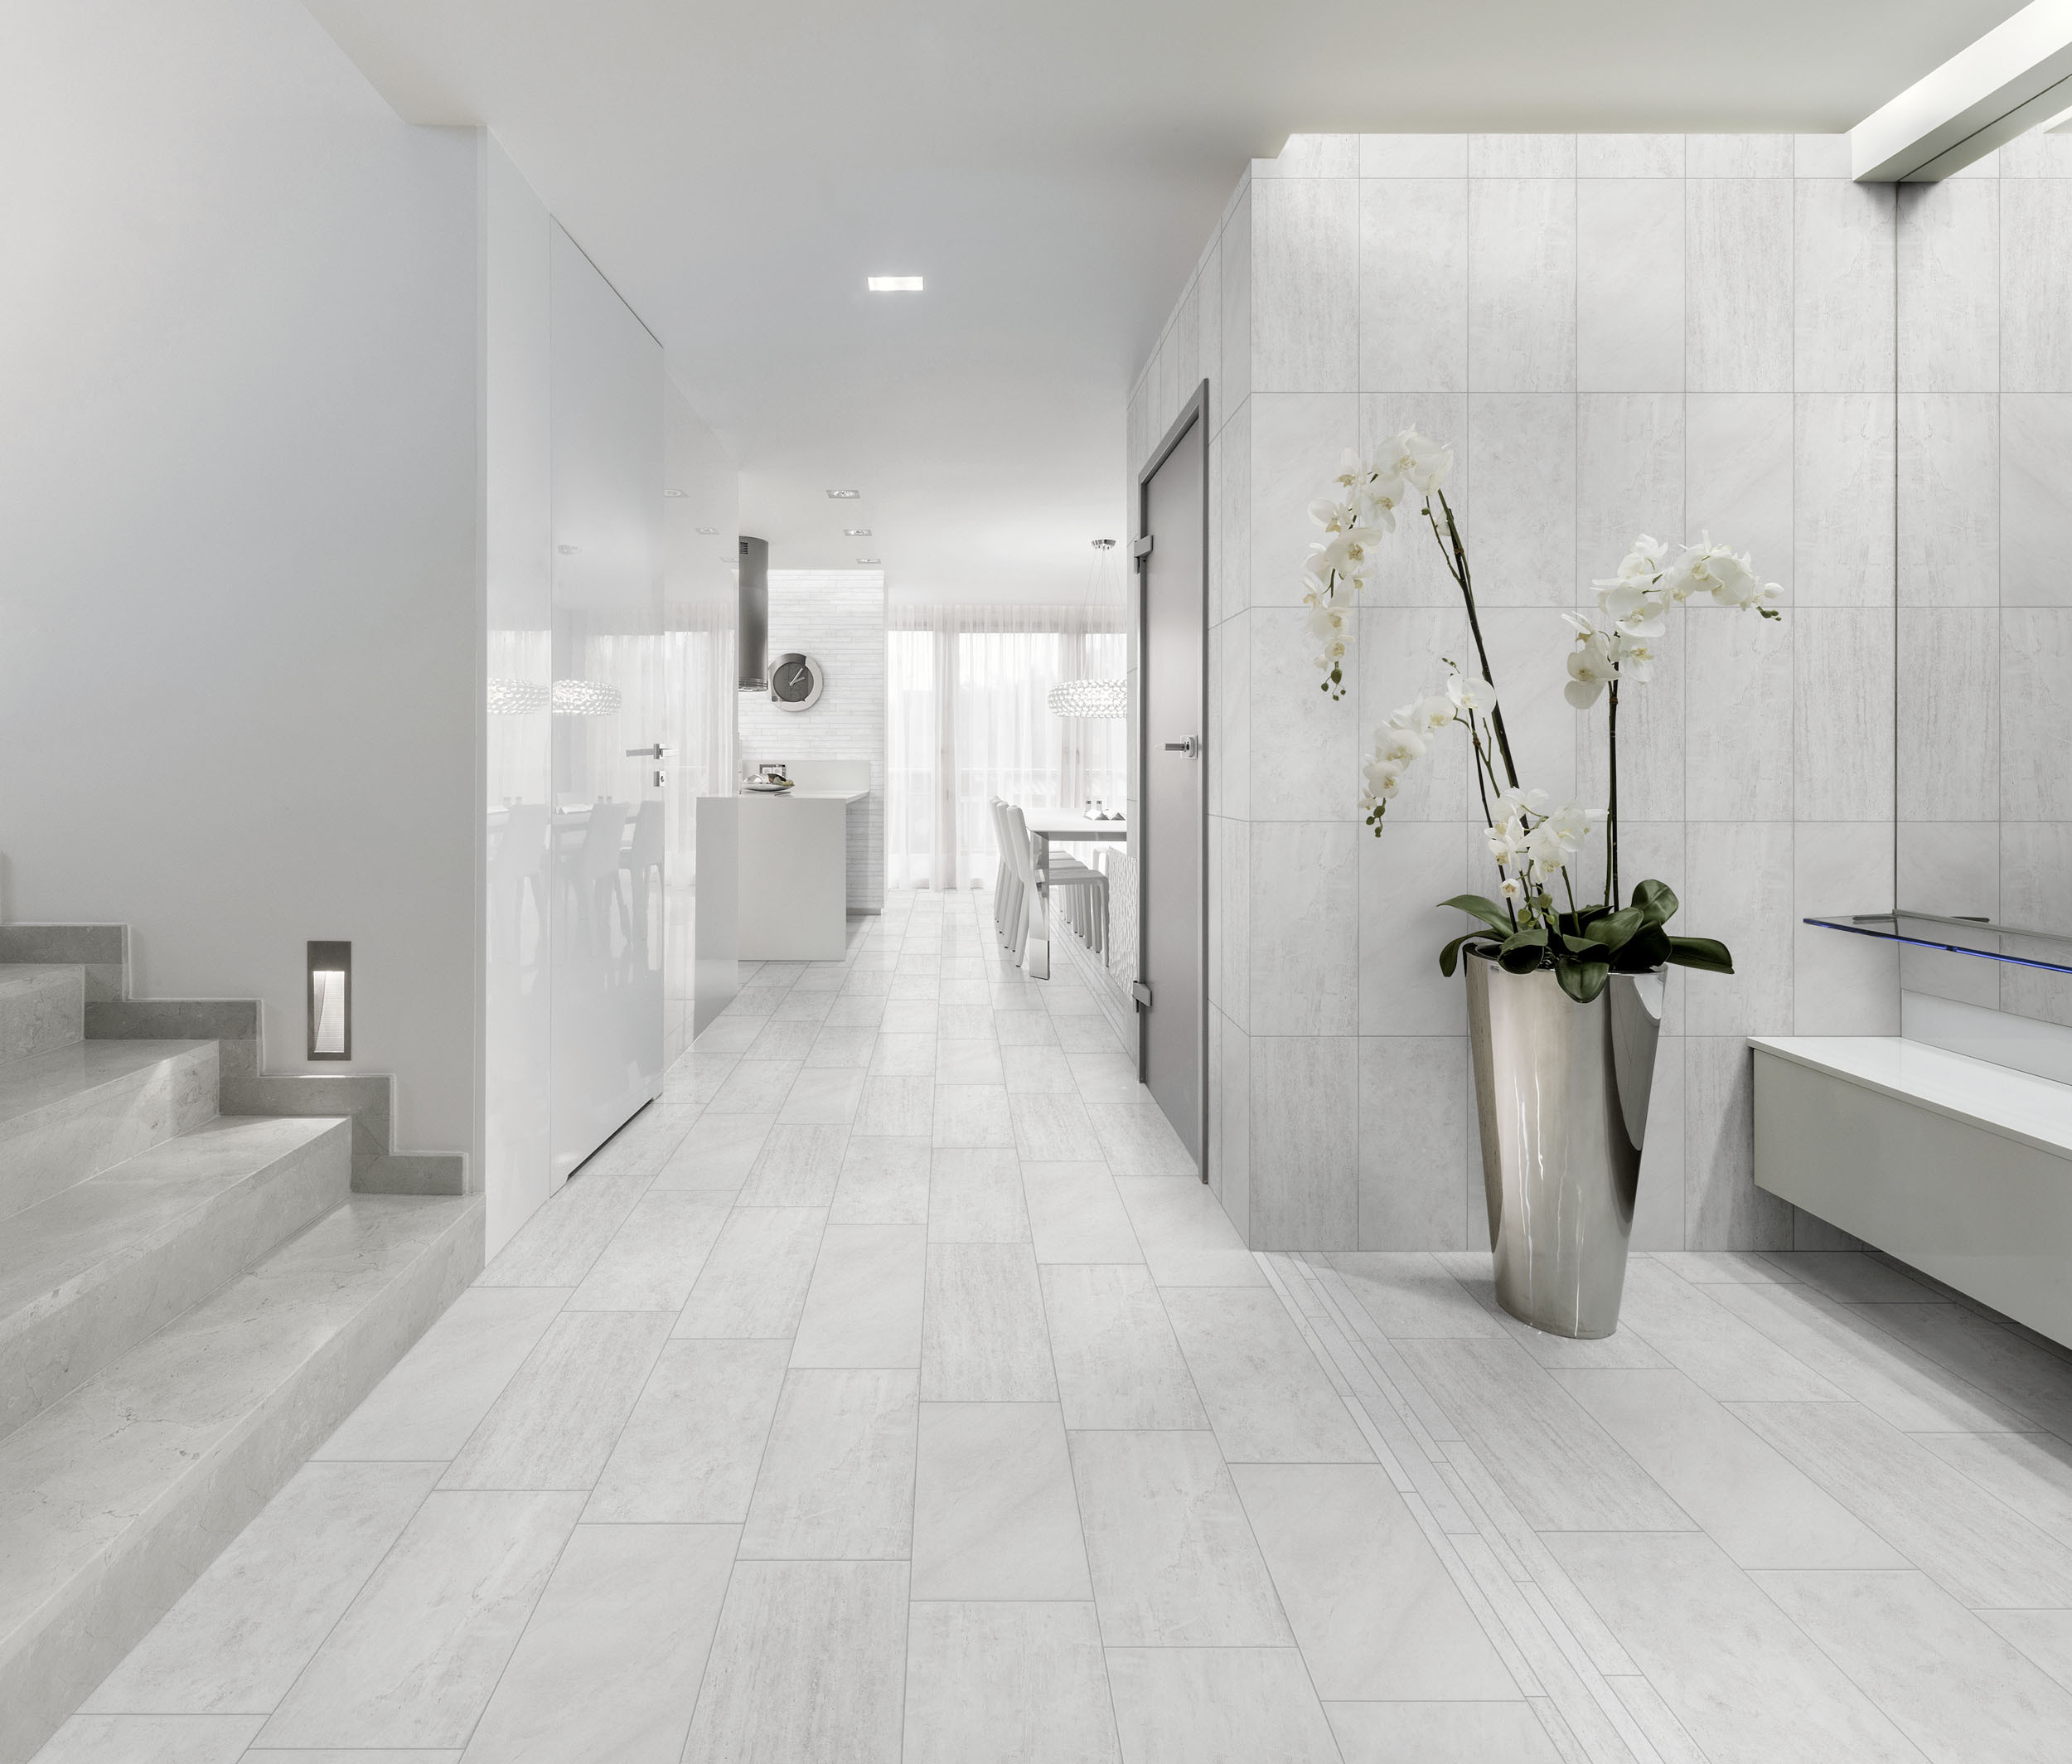 White Porcelain Tile Bathroom
 Porcelain Tile With Mixed Look of Wood Stone and Concrete